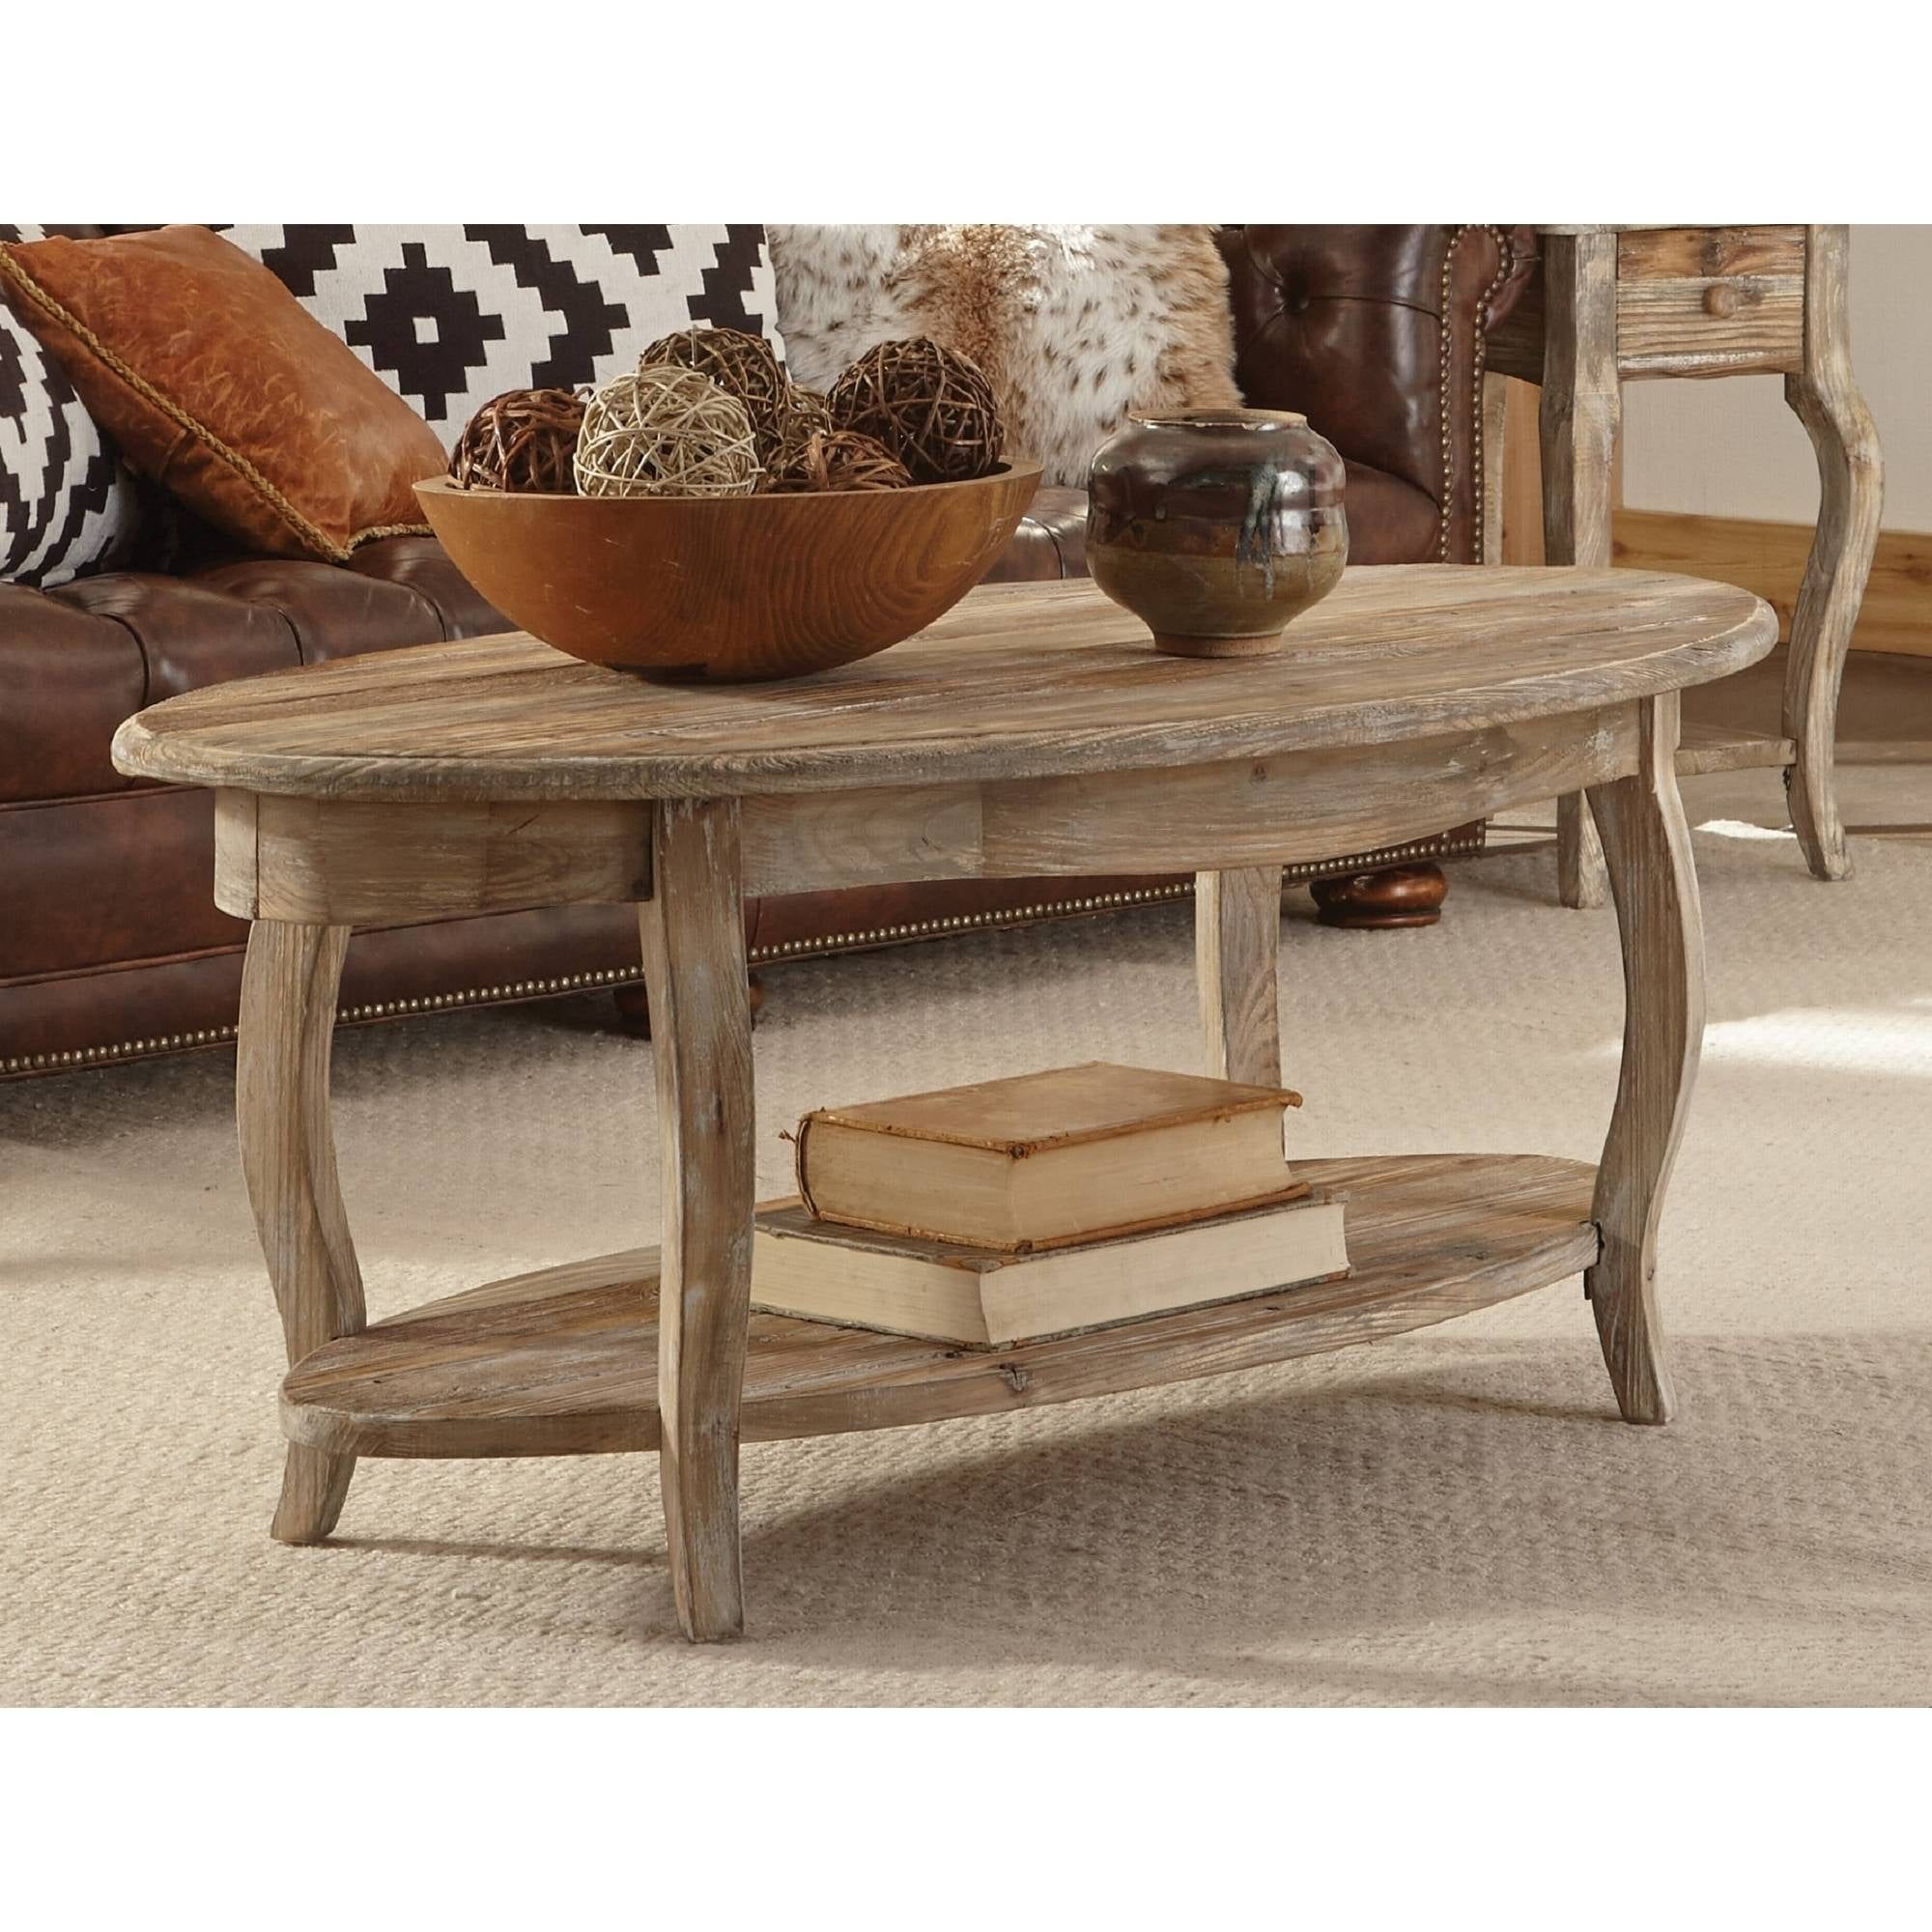 Alaterre Rustic Reclaimed Oval Coffee Table, Driftwood – Walmart For Rustic Coffee Tables (View 9 of 20)